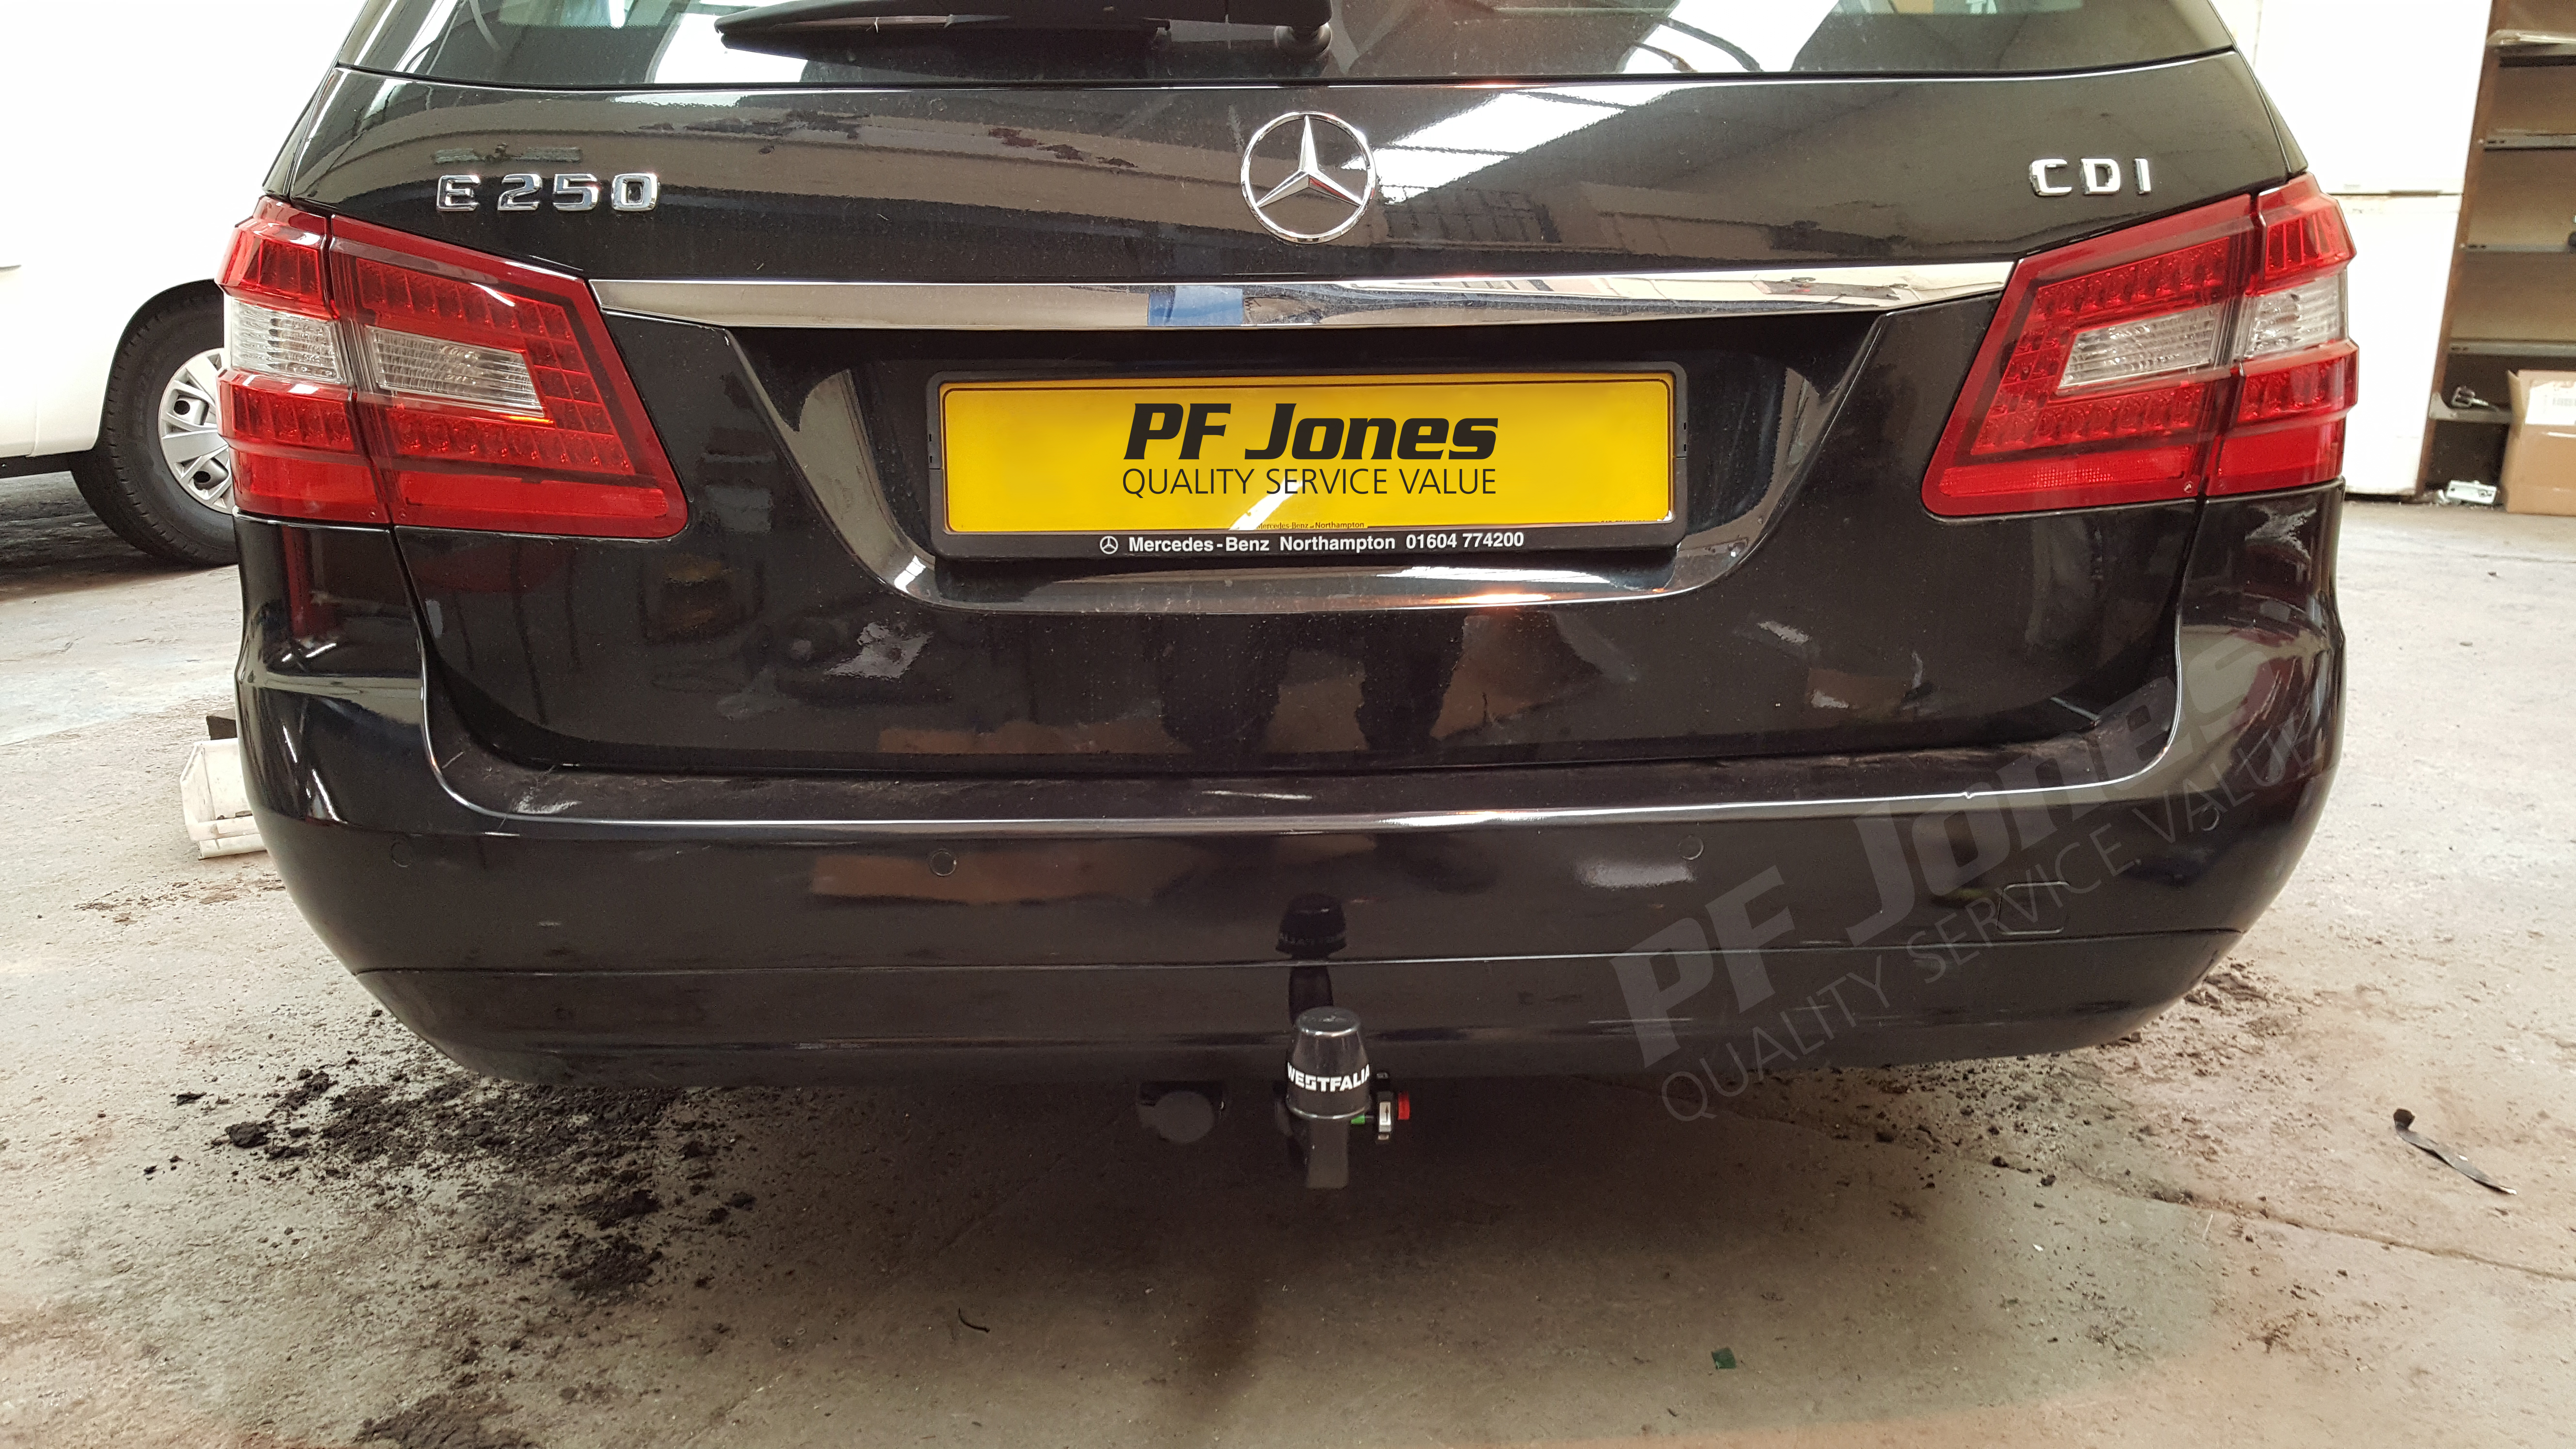 How Much Are Towbars